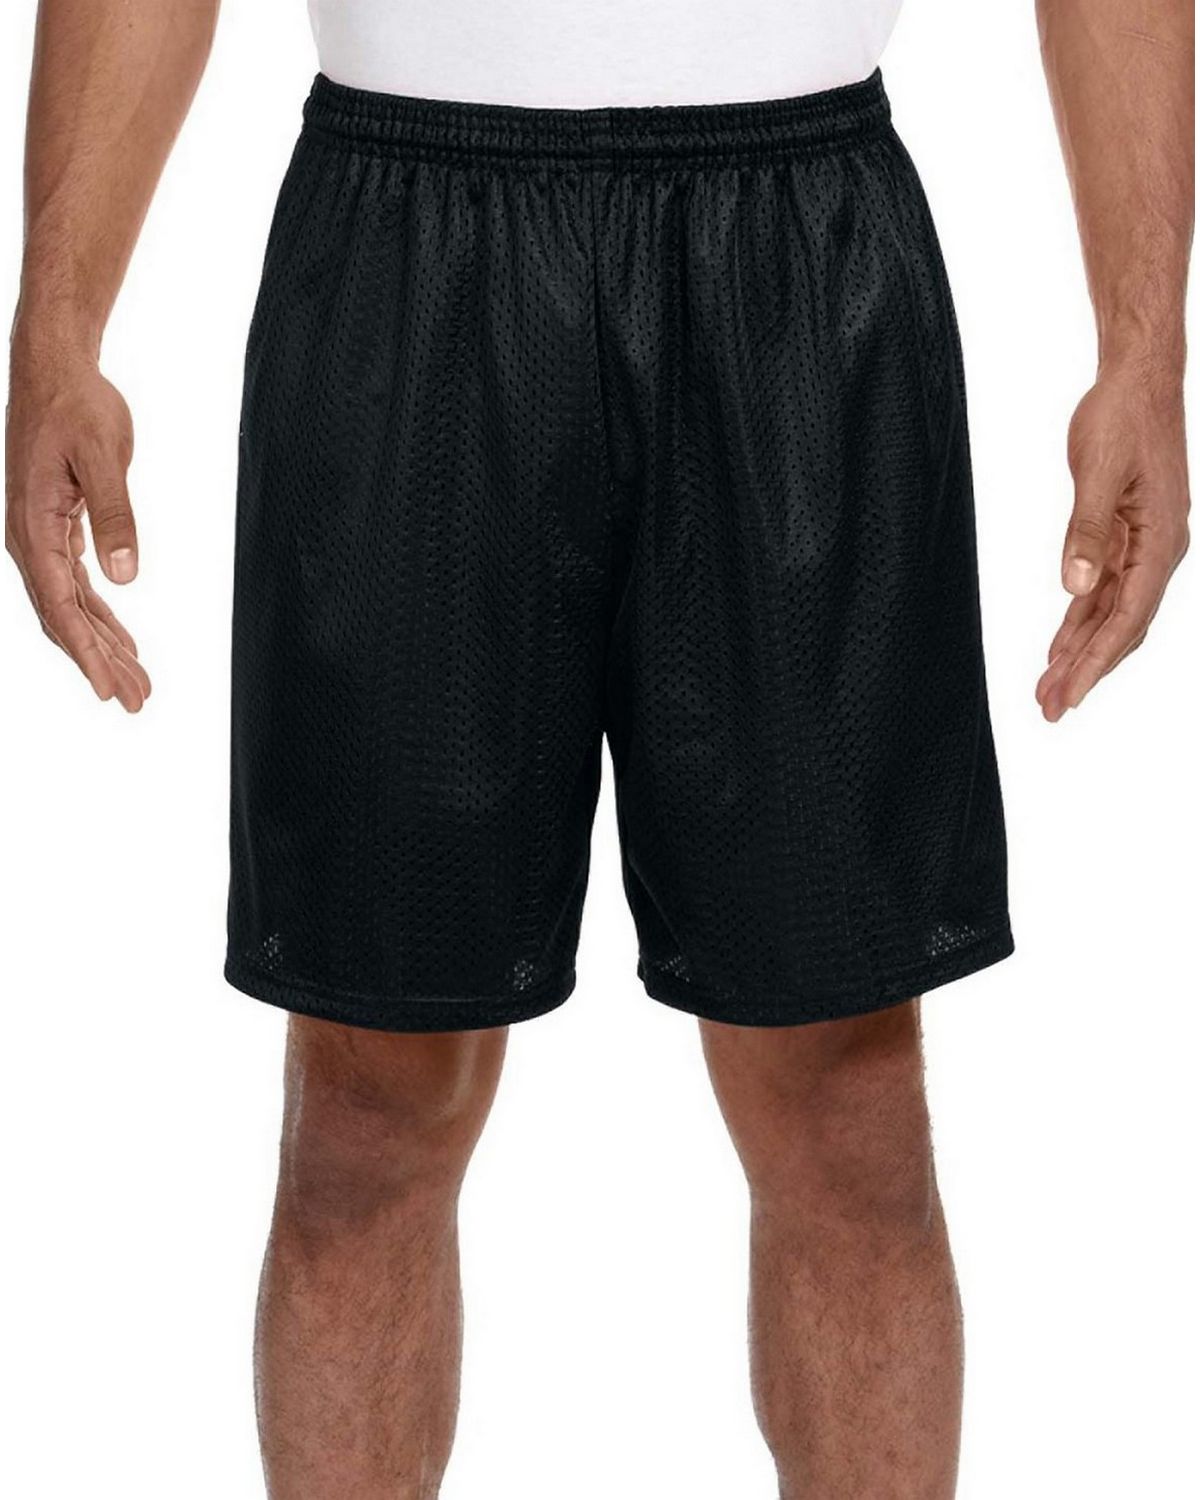 A4 N5293 Men's Tricot-Lined 7 Mesh Shorts